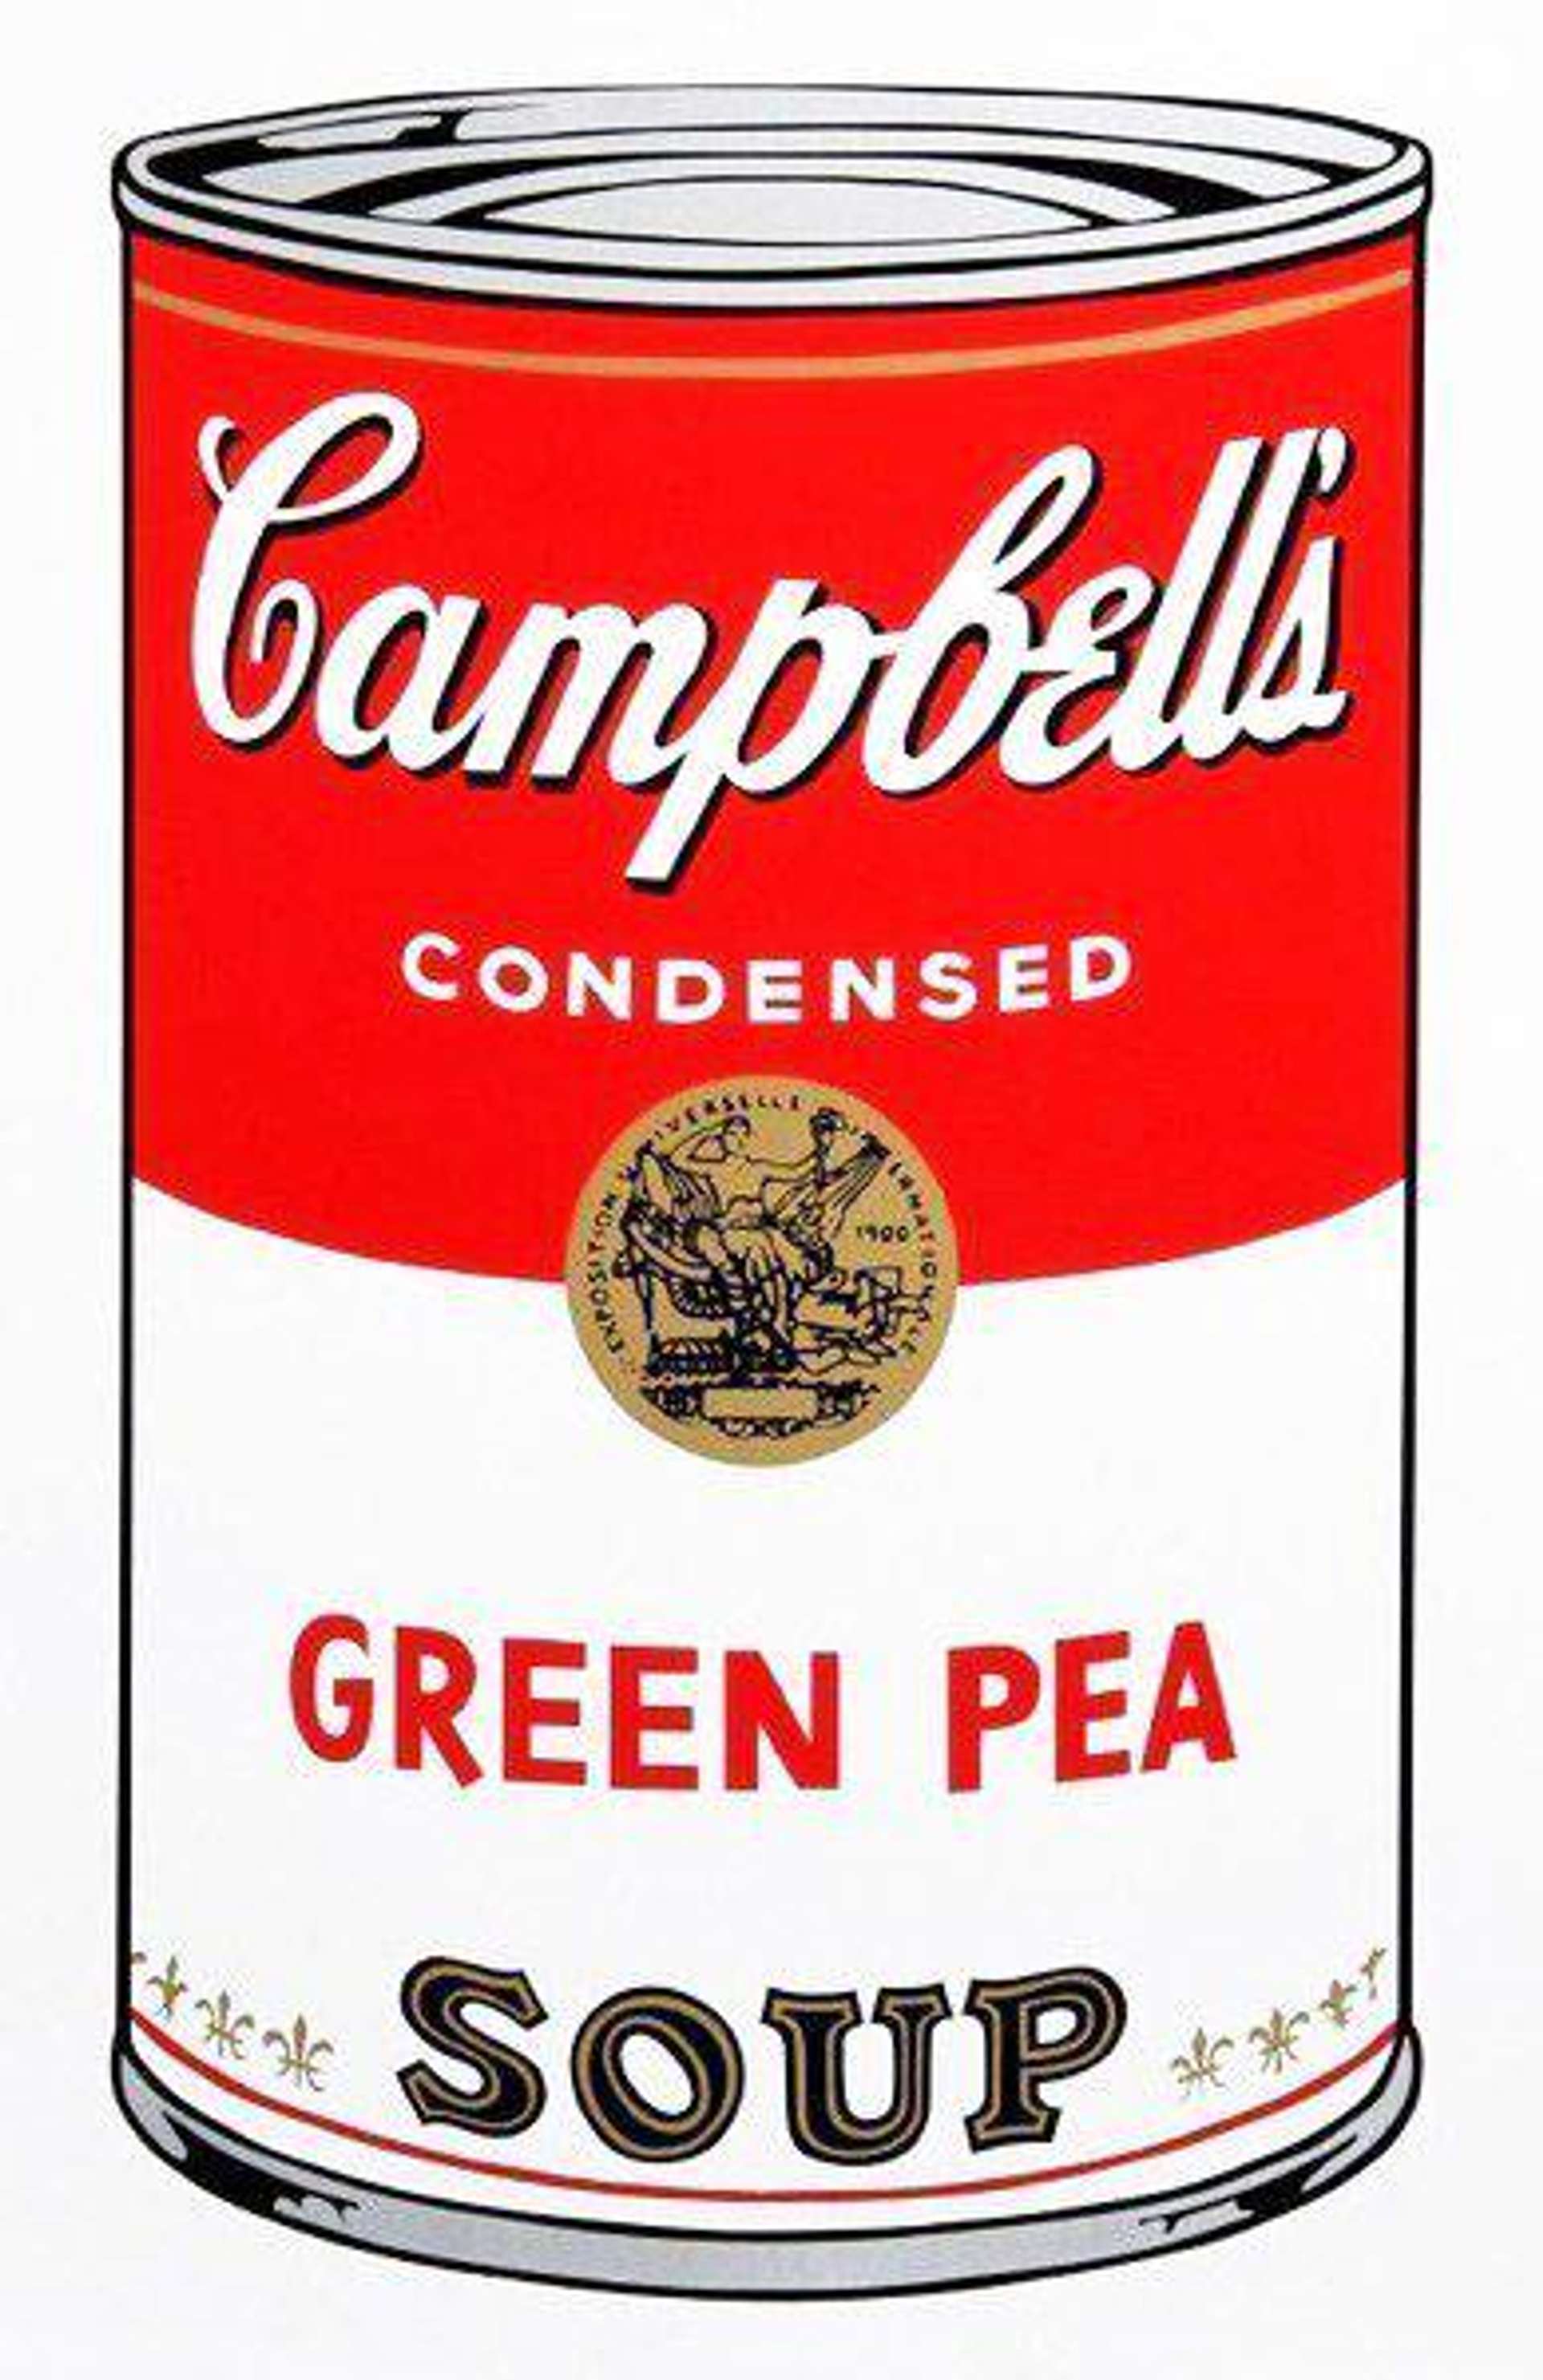 Andy Warhol: Campbell’s Soup I, Green Pea (F. & S. II.50) - Signed Print